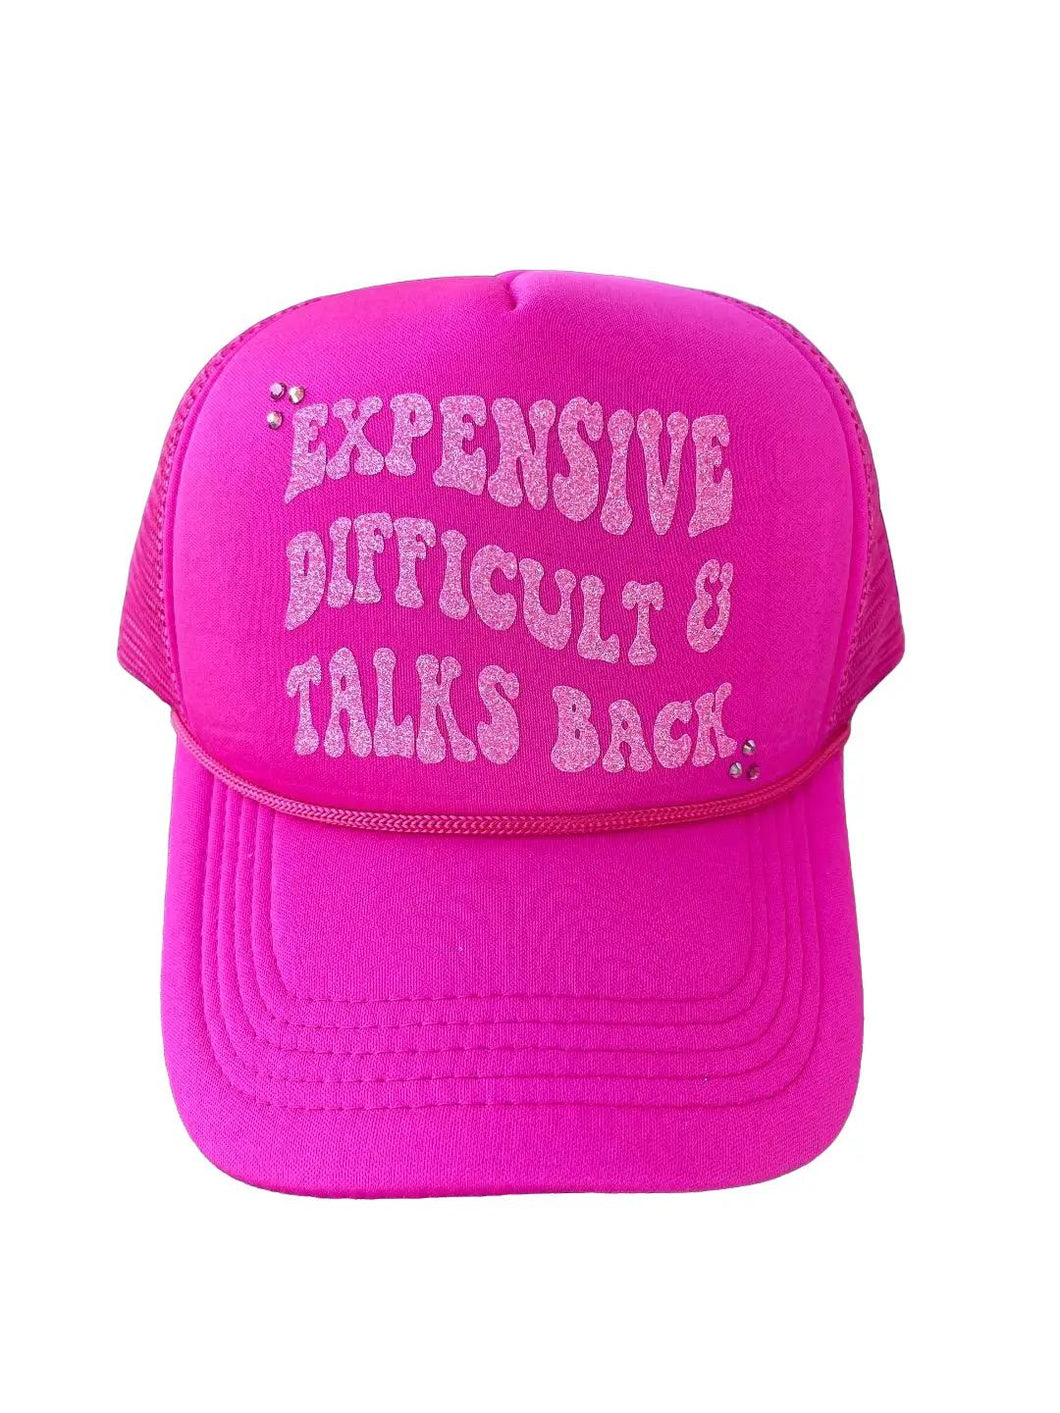 Hot Pink Trucker Hat Expensive Difficult & Talks Back